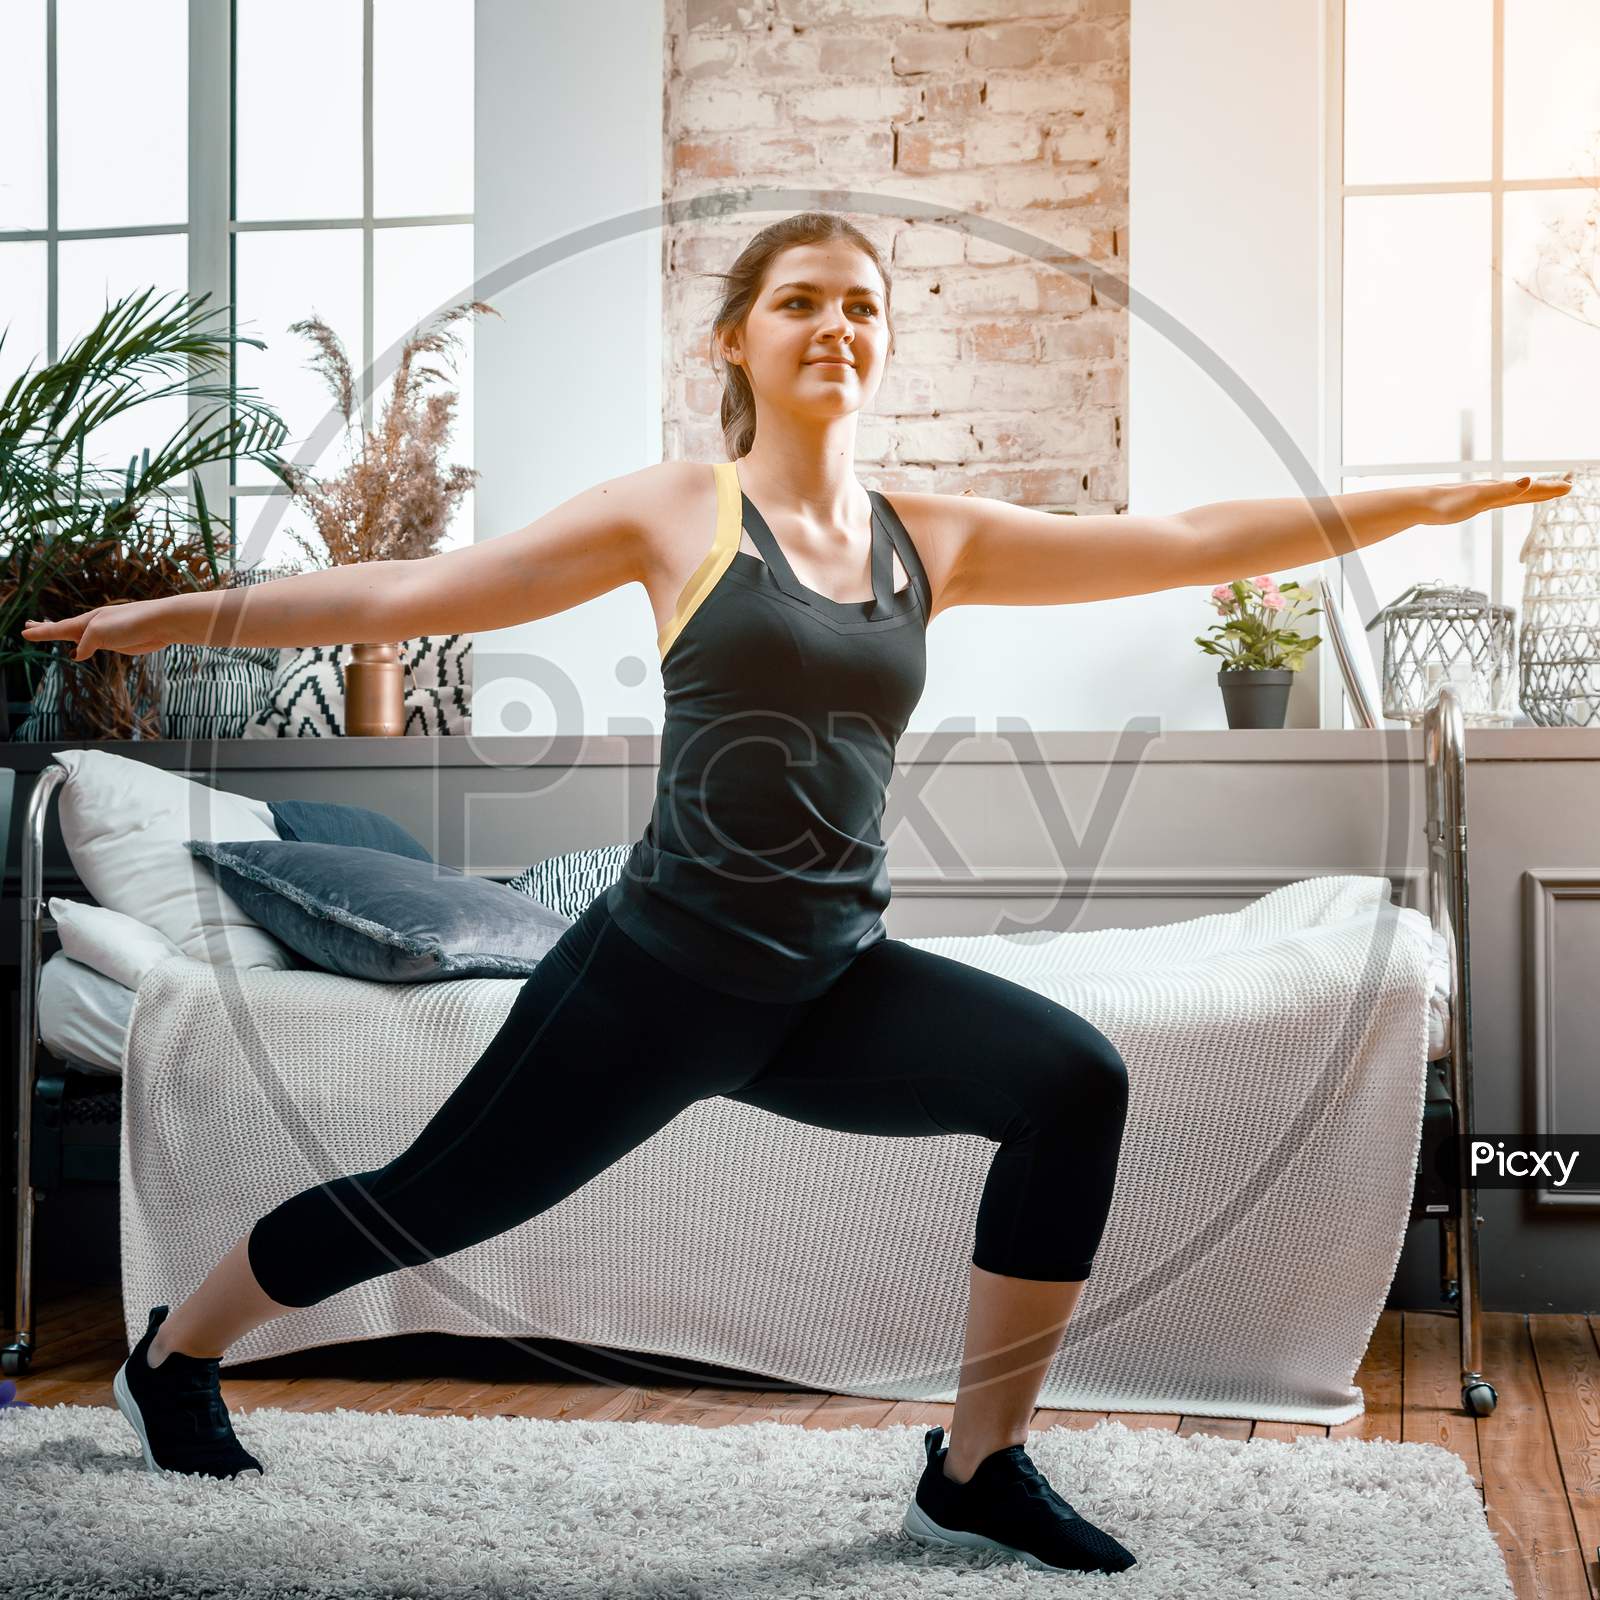 A Young Woman Goes In For Sports At Home, Online Workout From The Laptop. The Athlete Lunges   In The Bedroom, In The Background There Is A Bed, A Vase, A Carpet.